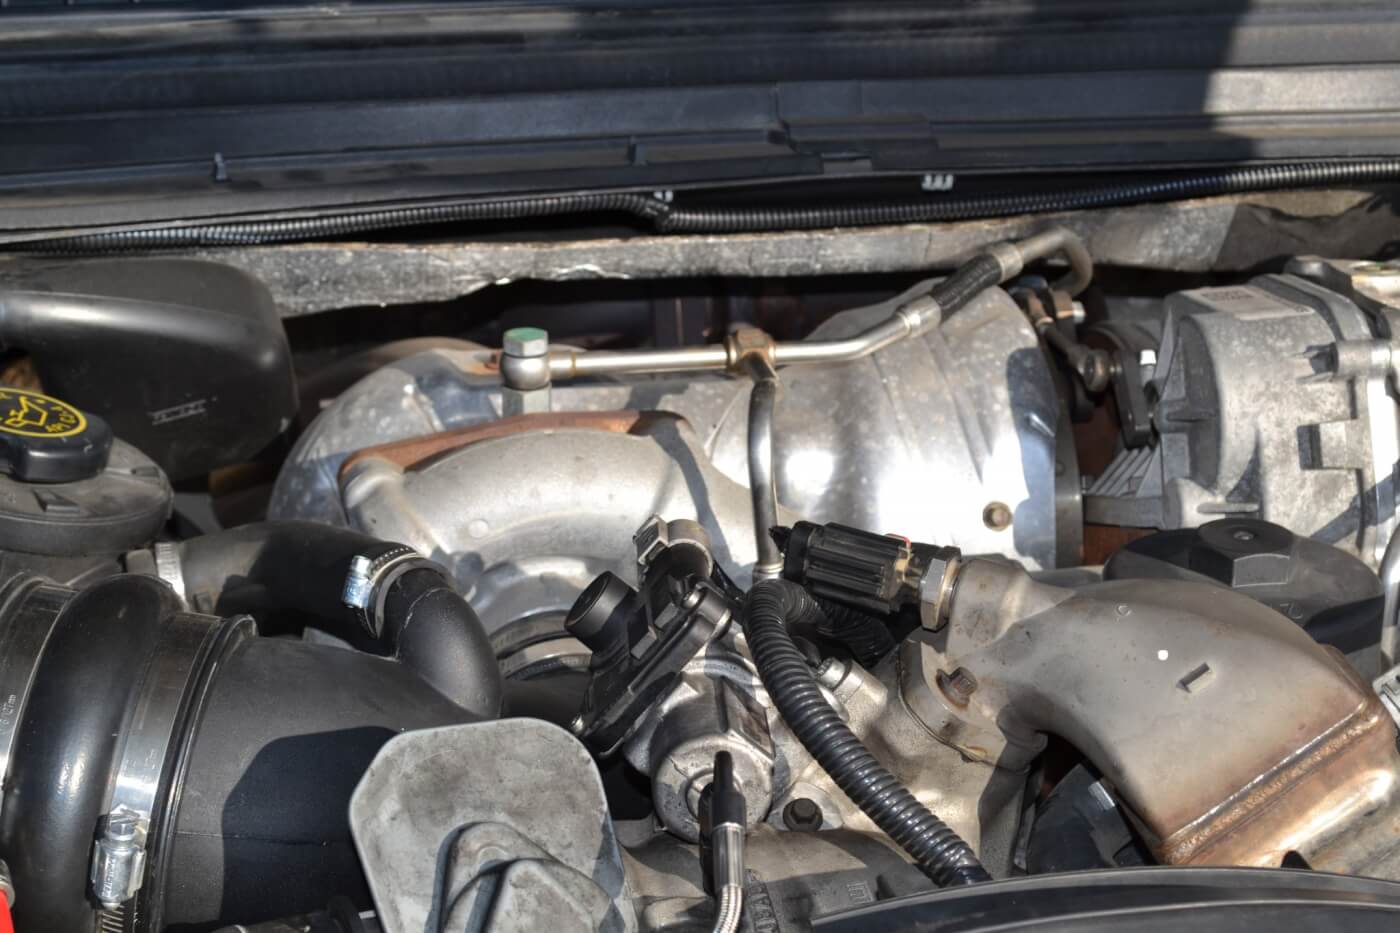 Perhaps the most exciting of the OEM truck turbocharger setups, the 6.4L Power Stroke engine featured compound turbochargers, which had enormous airflow potential.